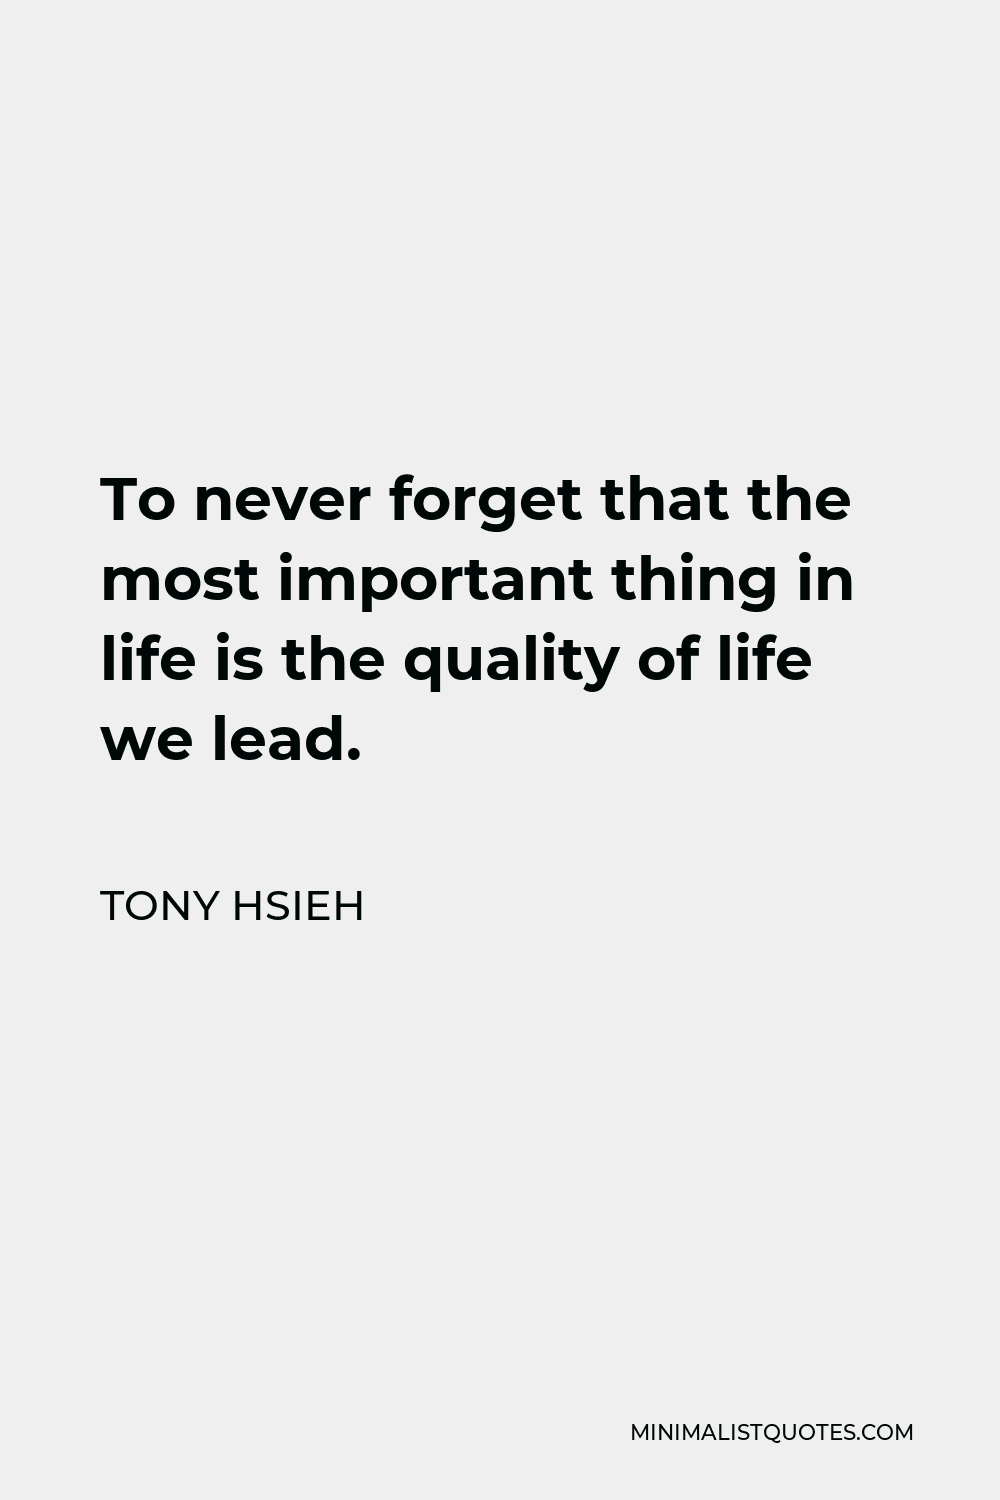 Tony Hsieh Quote - To never forget that the most important thing in life is the quality of life we lead.